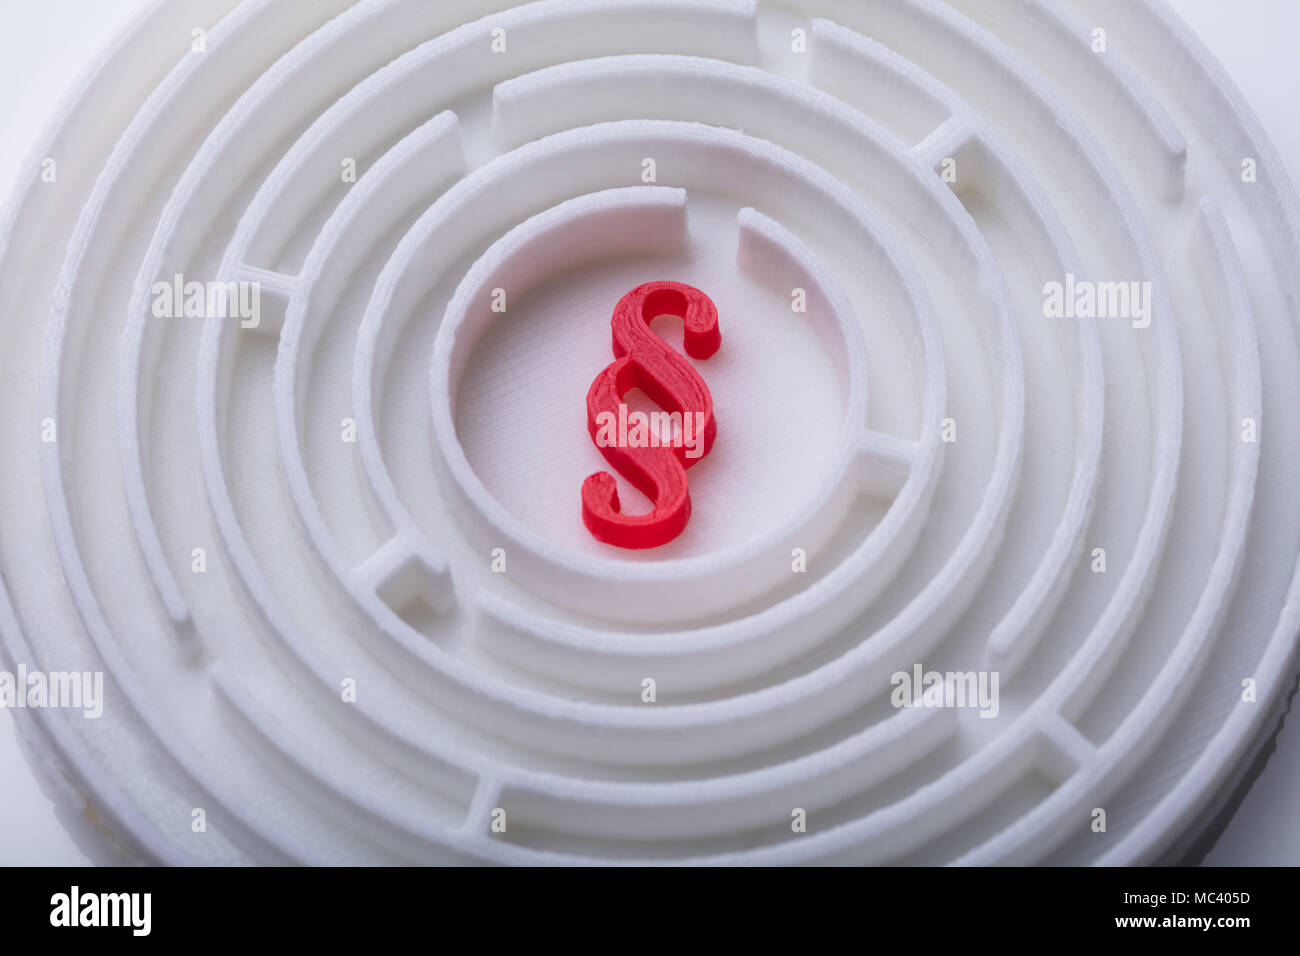 High Angle View Of Maze With Red Paragraph Symbol In Center Stock Photo